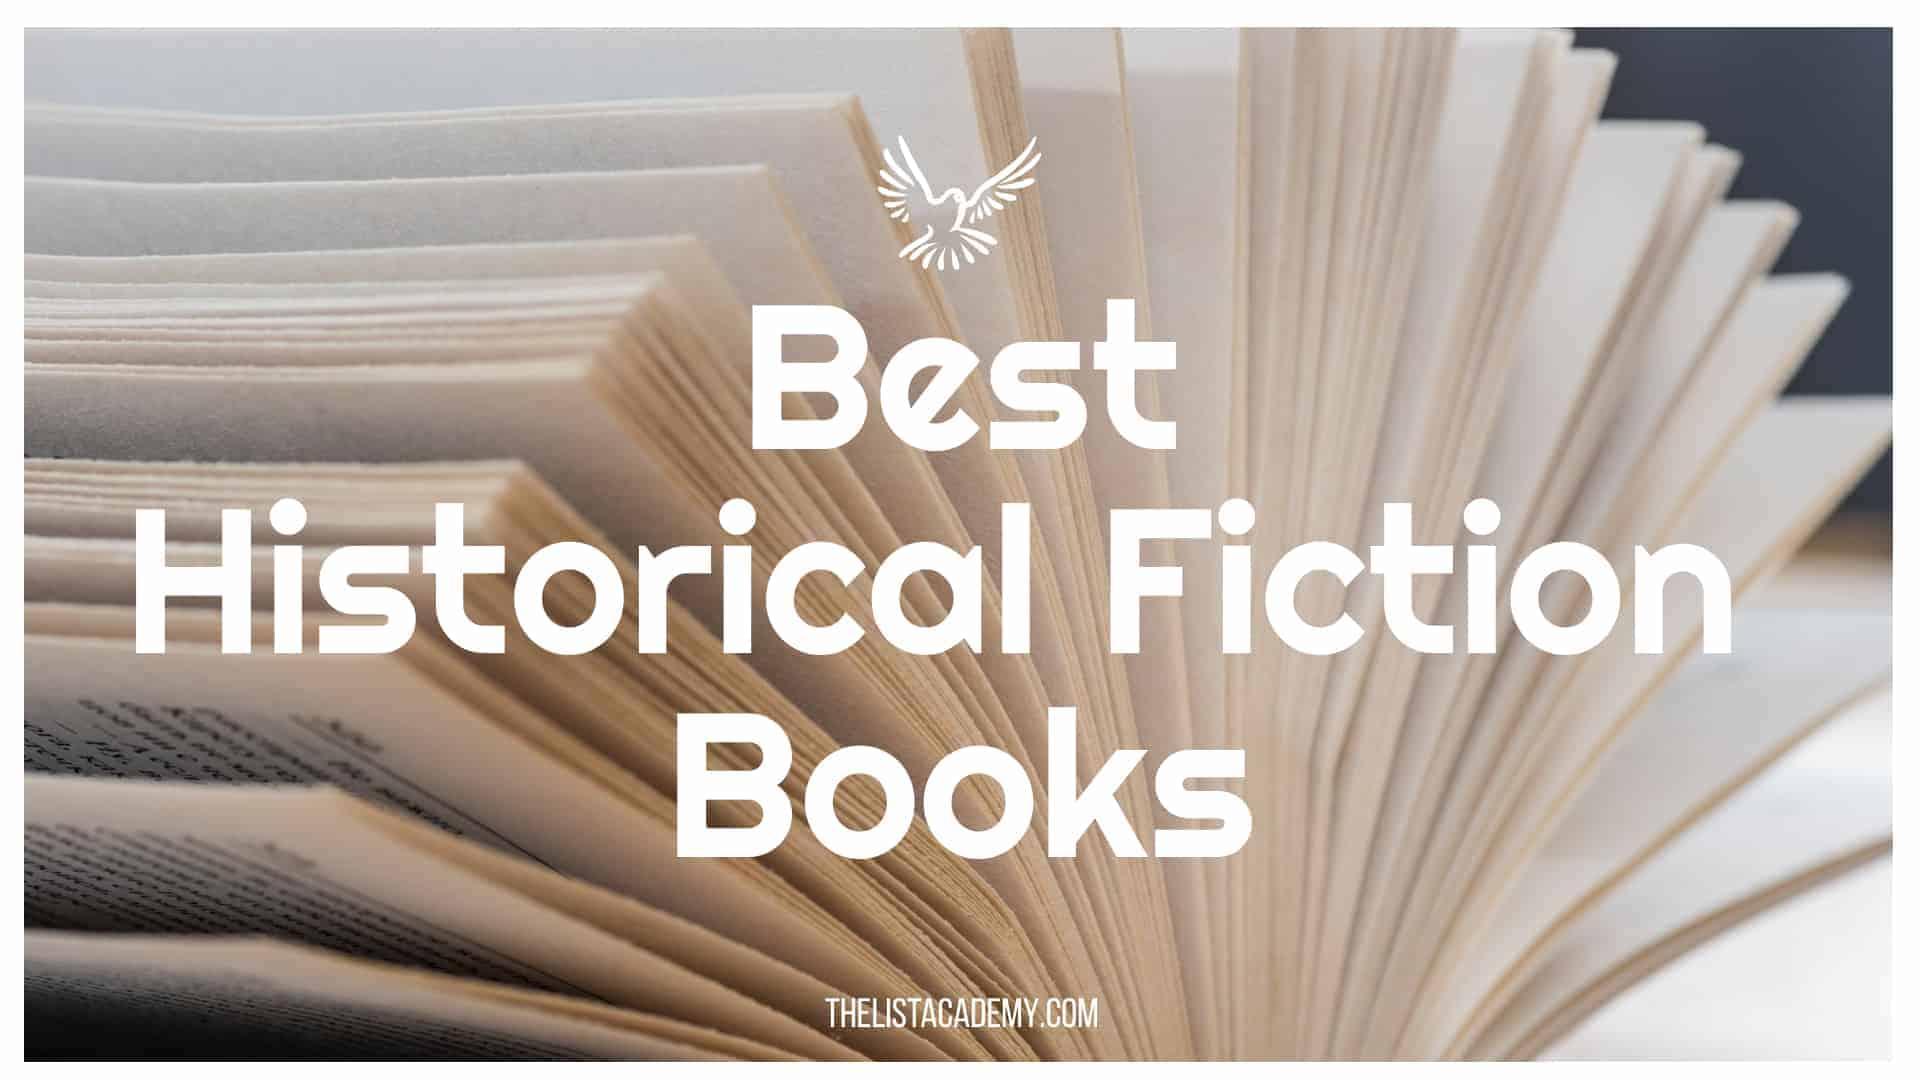 Cover Image For List : Must Read 438 Historical Fiction Books